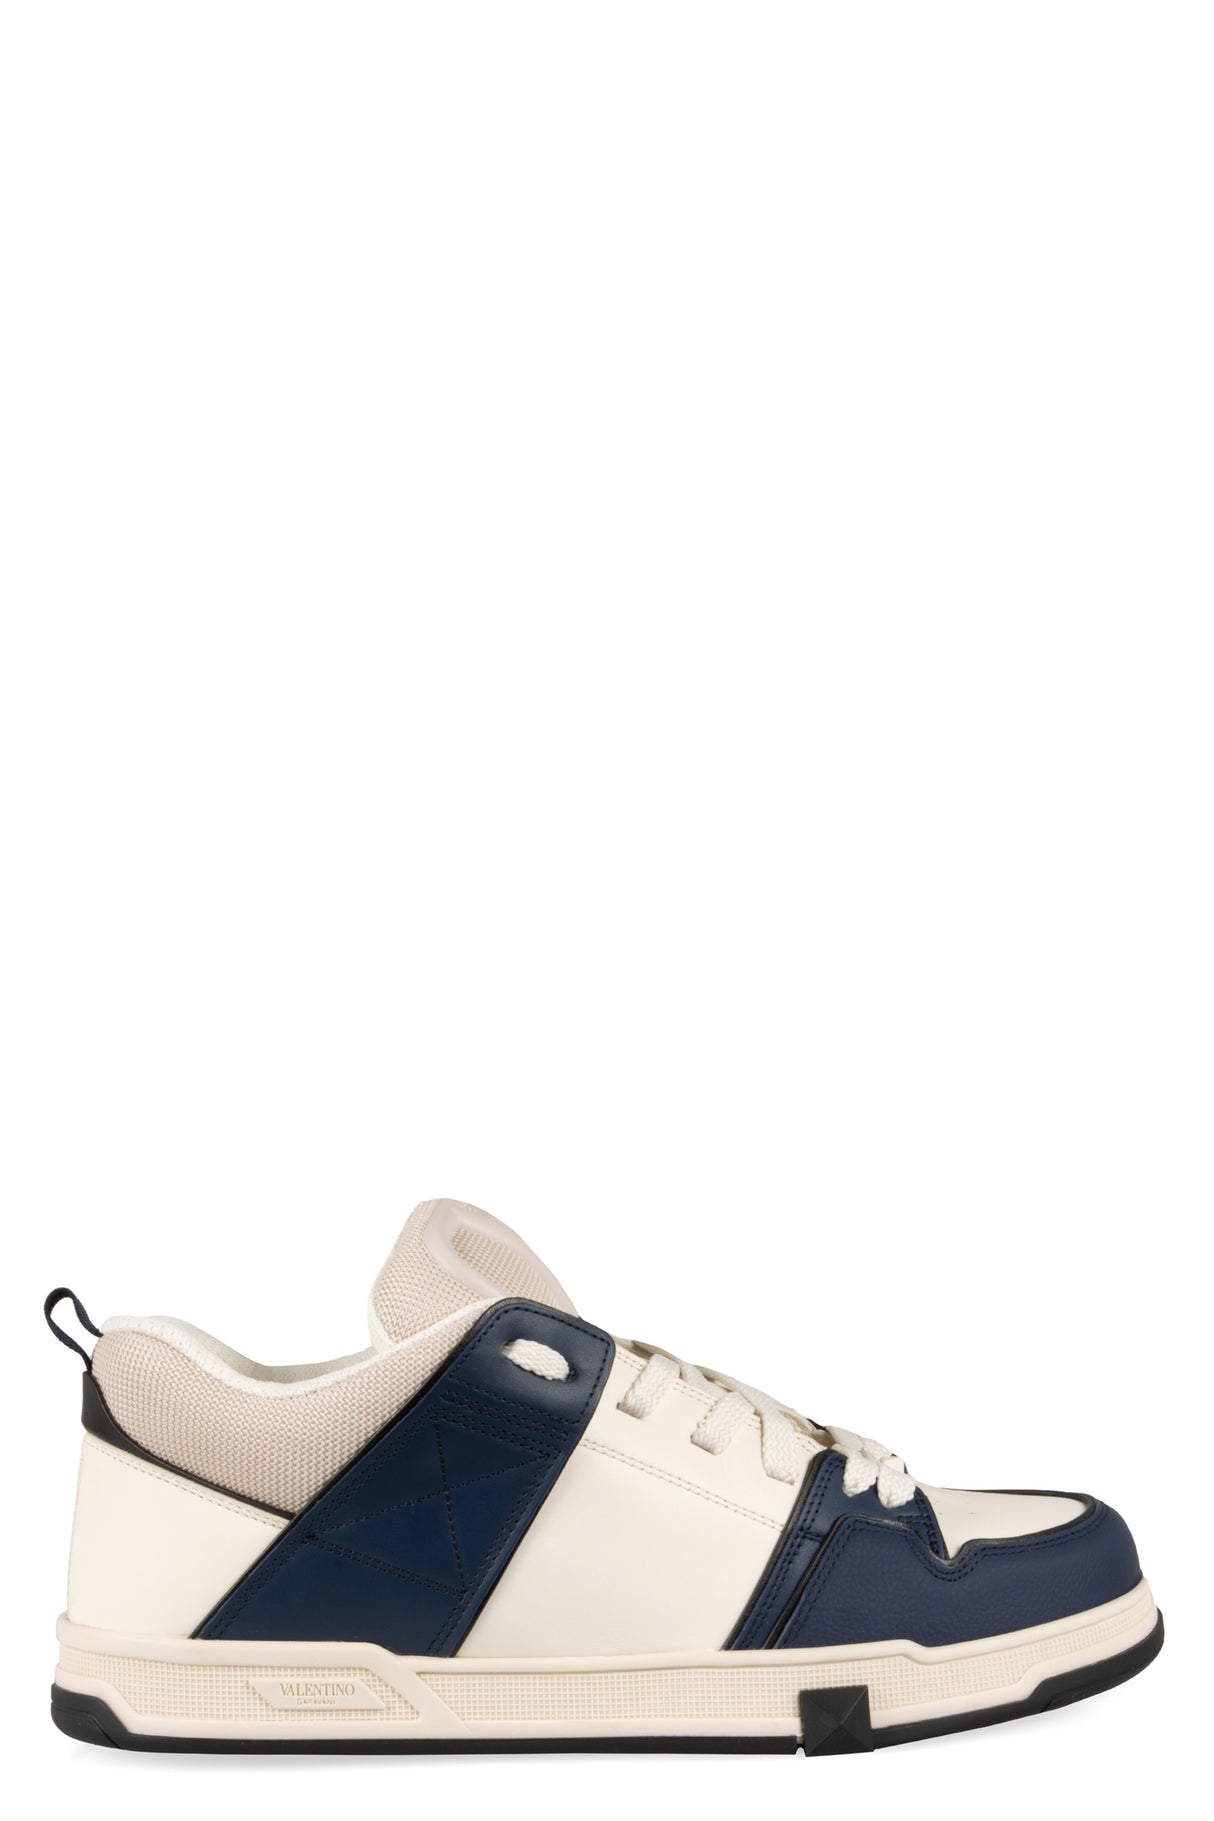 VALENTINO GARAVANI Mixed Colors Stylish Sneakers - Iconic Stud and Rubber Logo Detail